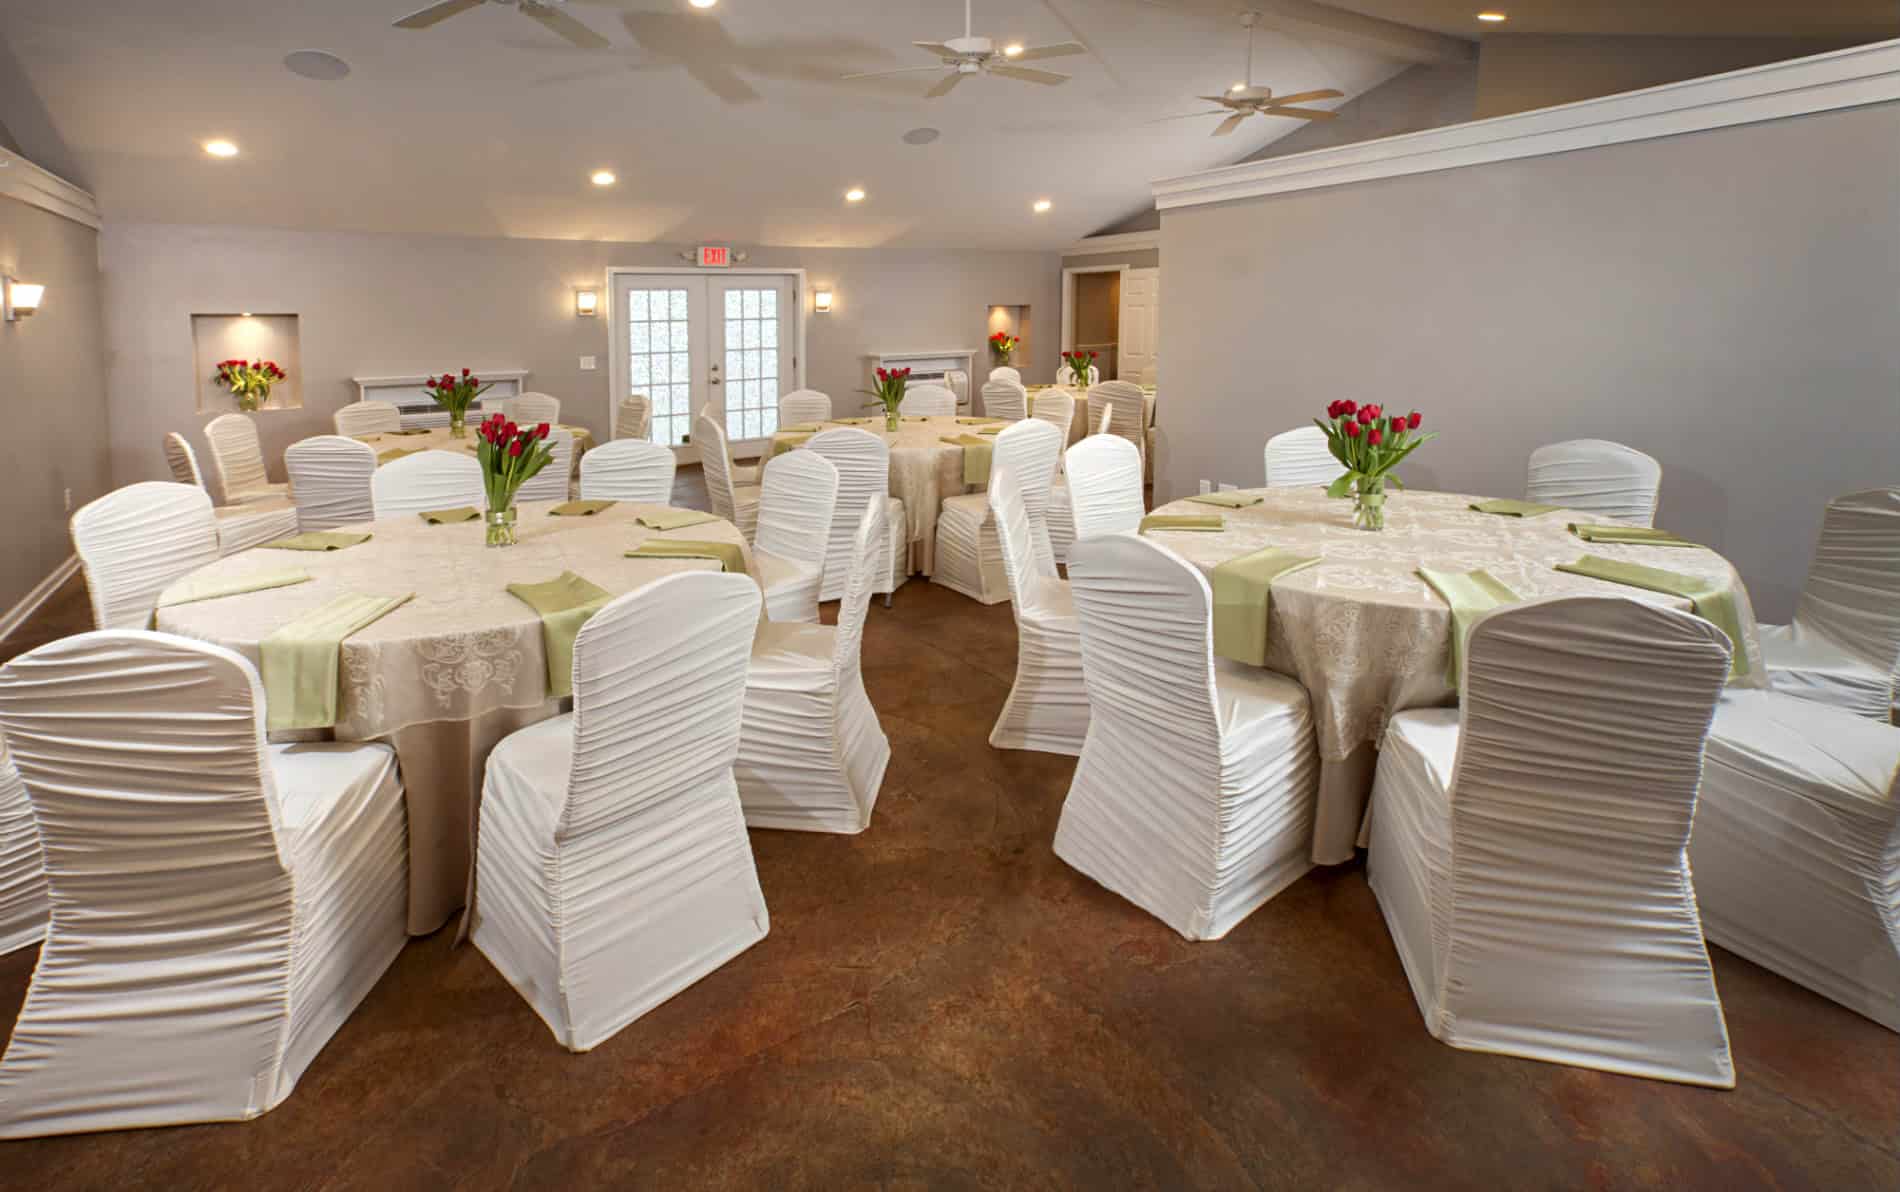 Large open room with four off - white lace covered tables, pale green napkins and red tulip arrangements